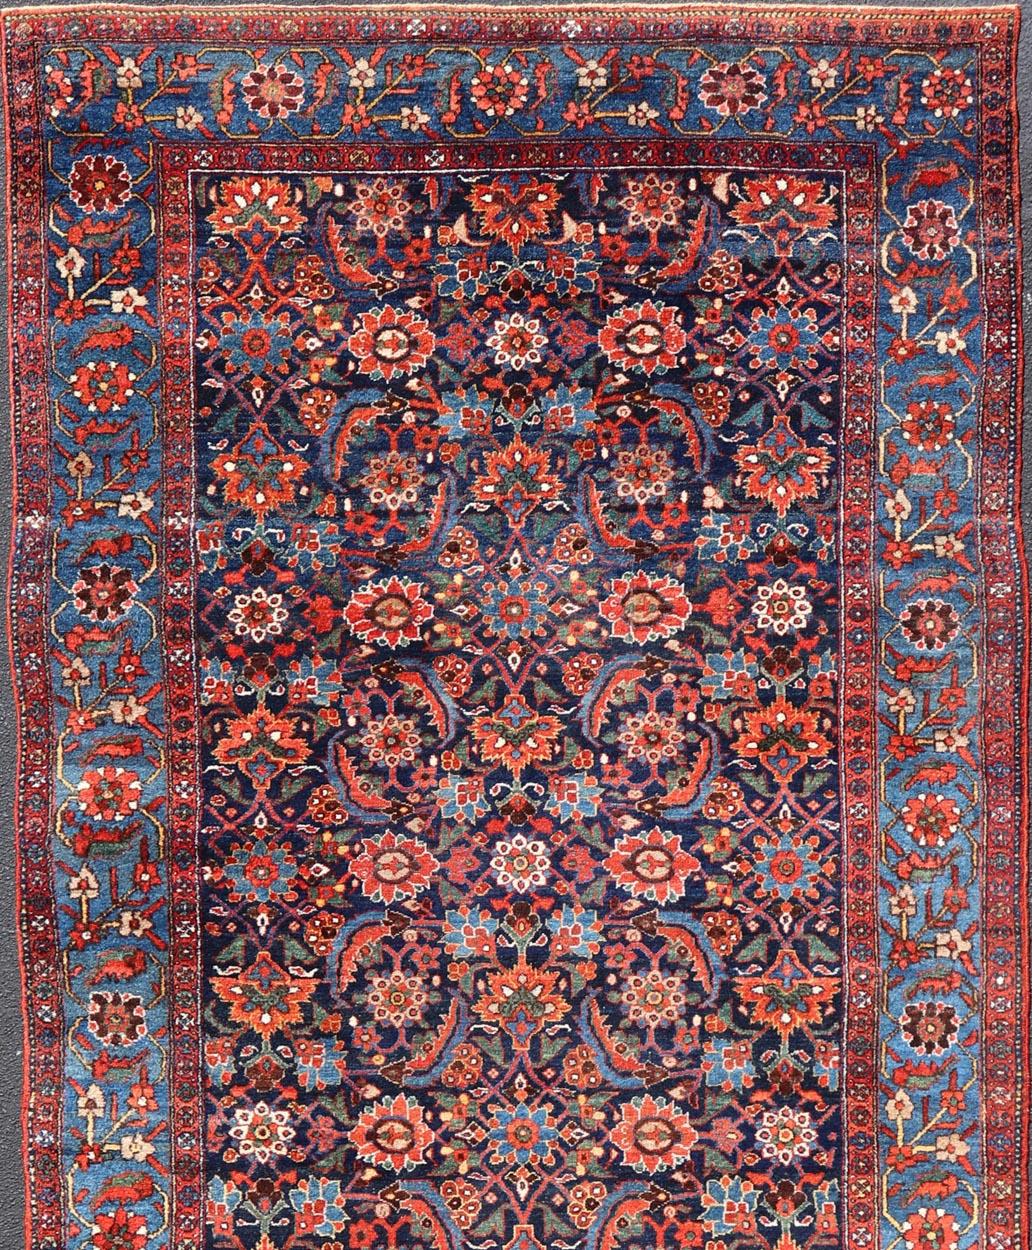 A very fine antique Persian Hamadan gallery runner with all-over design in Blue background, rug V21-0103, country of origin / type: Iran / Hamadan, circa 1920

Measures: 7'4 x 16'8

This antique Persian carpet, from the Hamadan district in